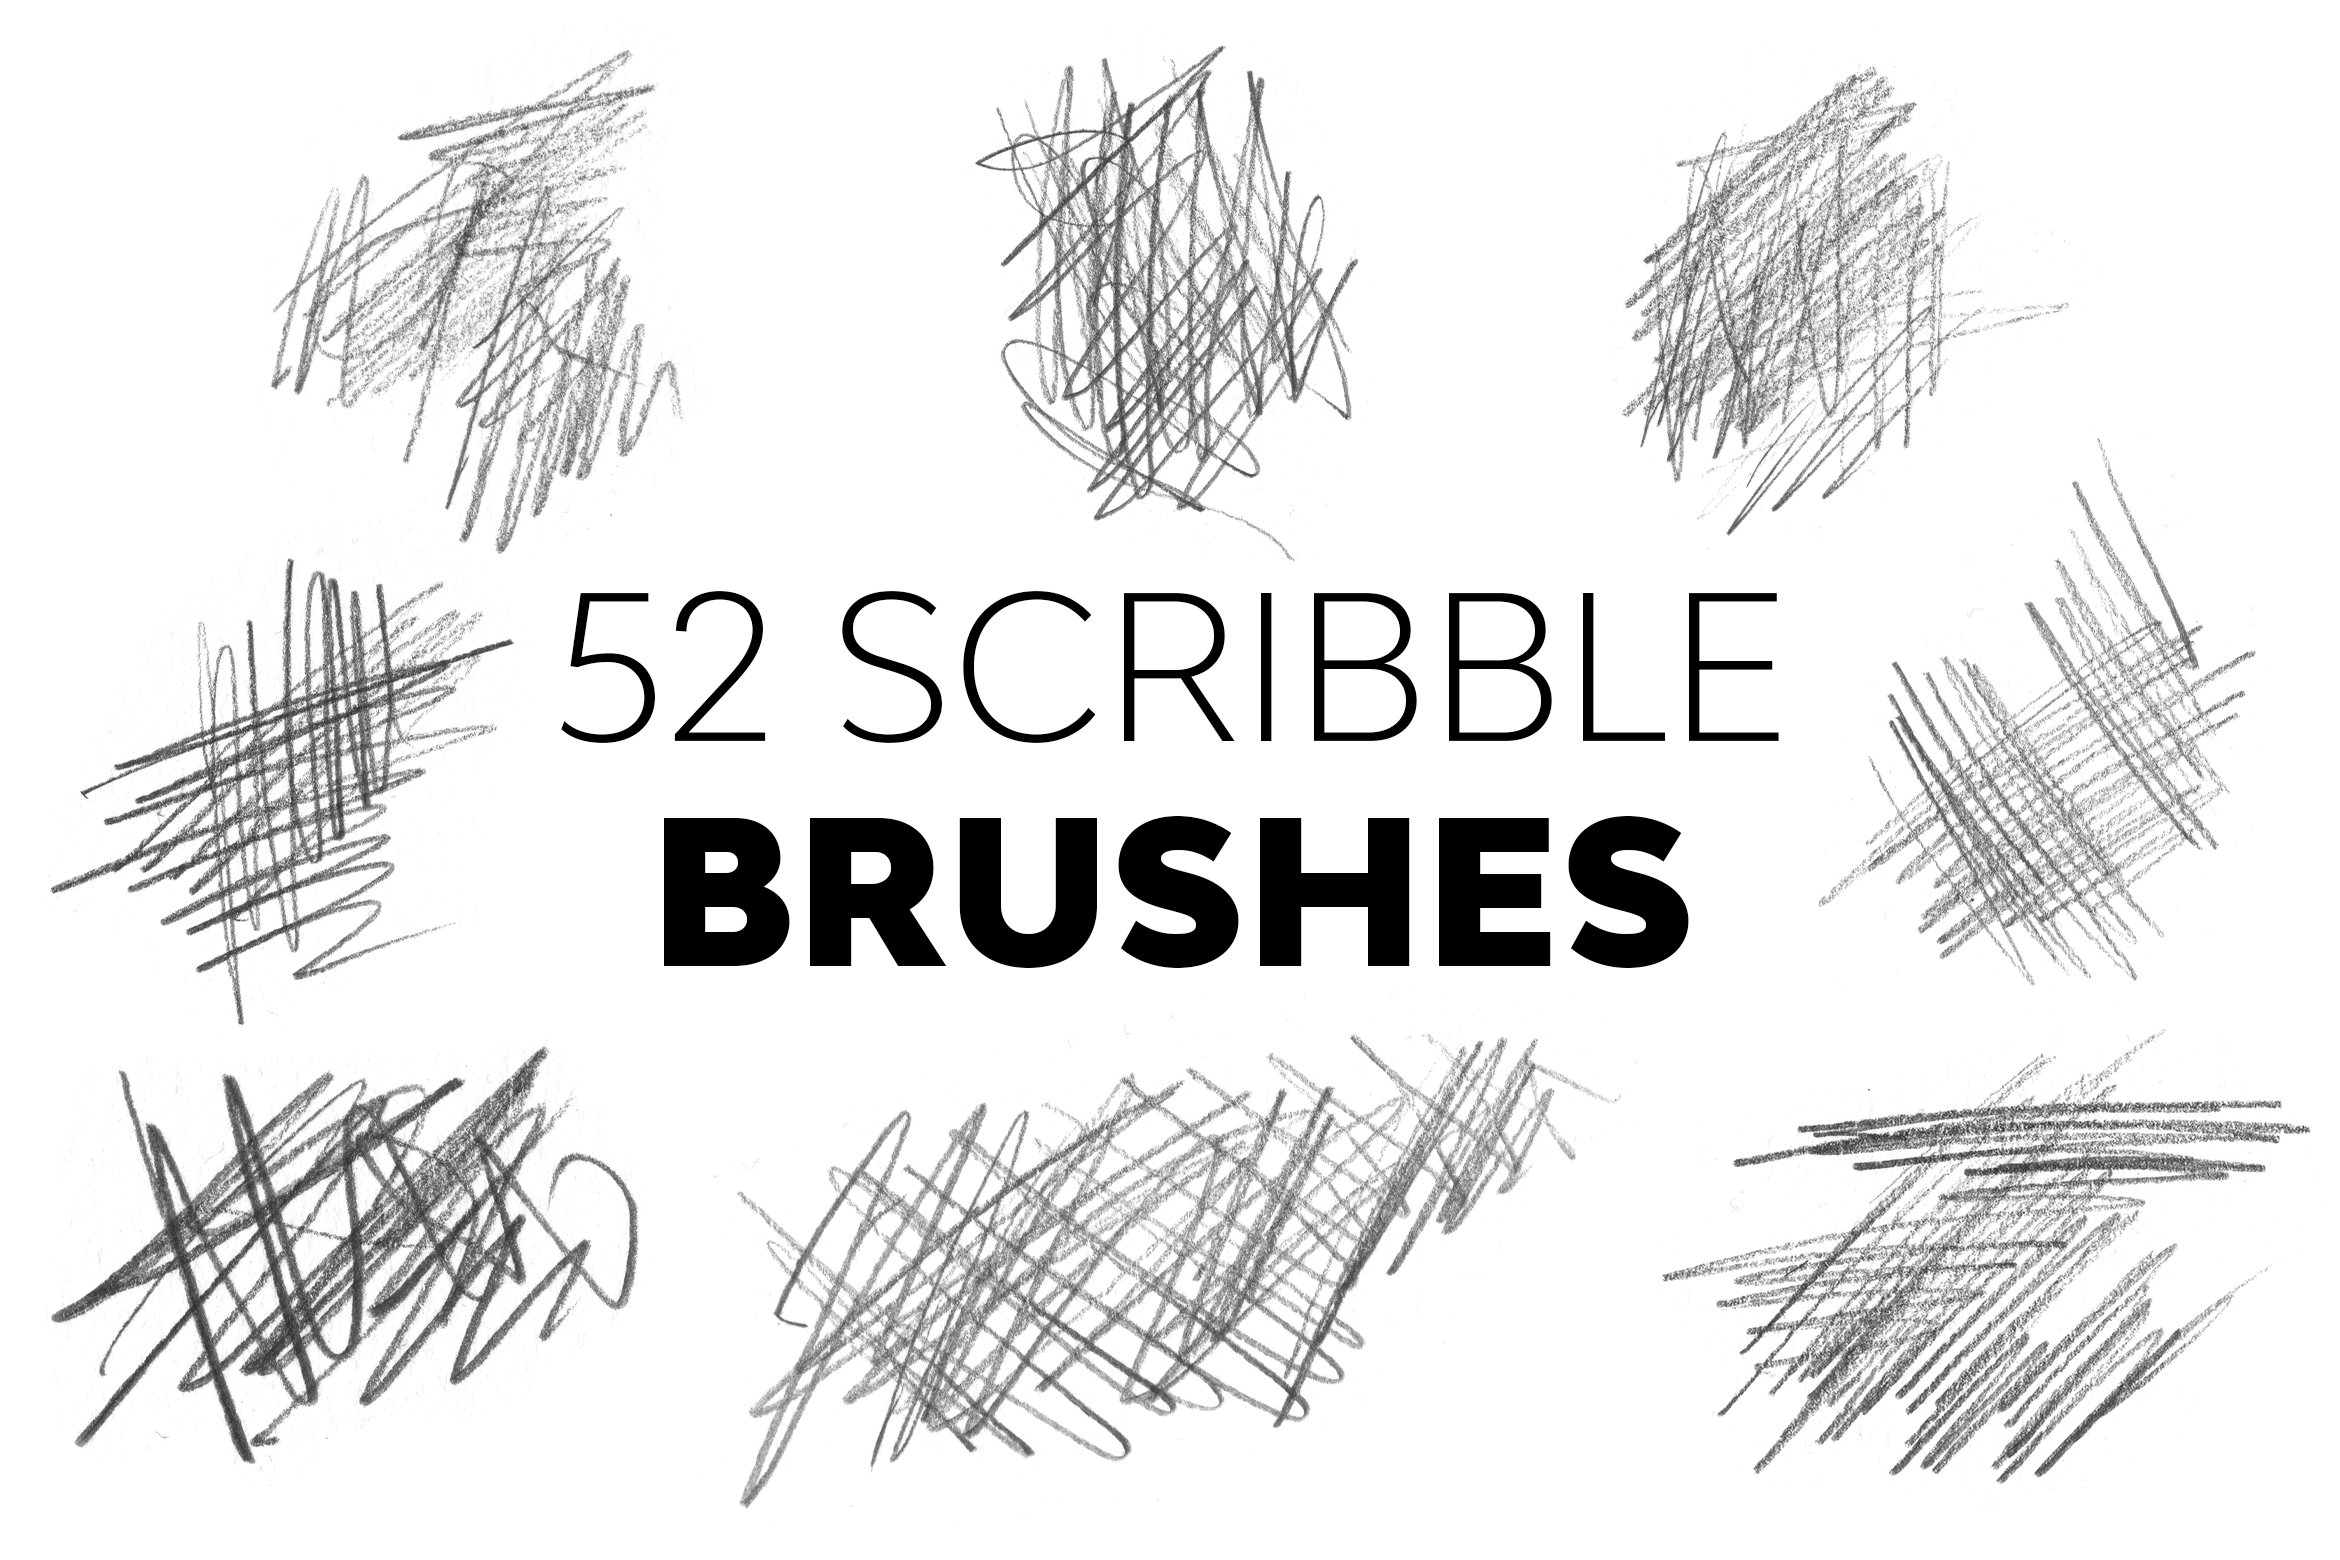 Scribble Brushescover image.